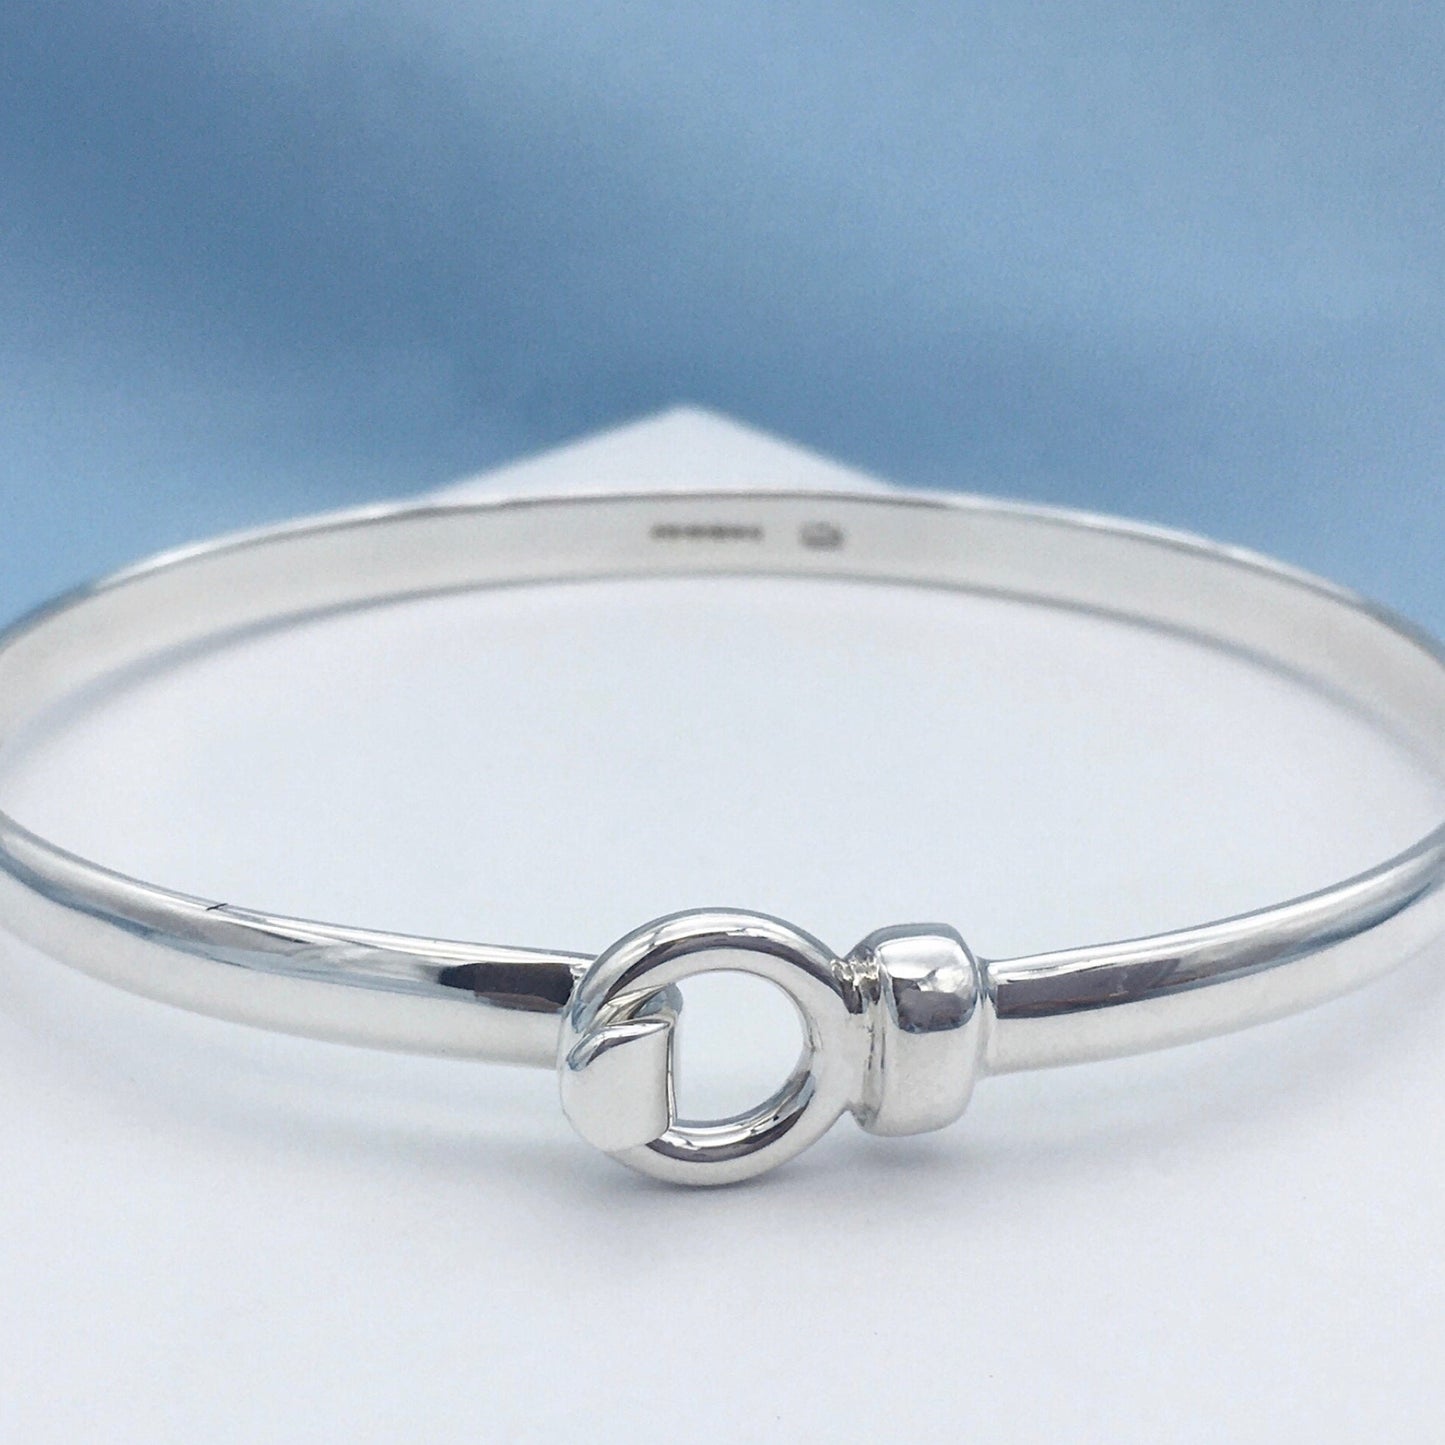 Cindy Sterling Silver Bangle for Small Wrists